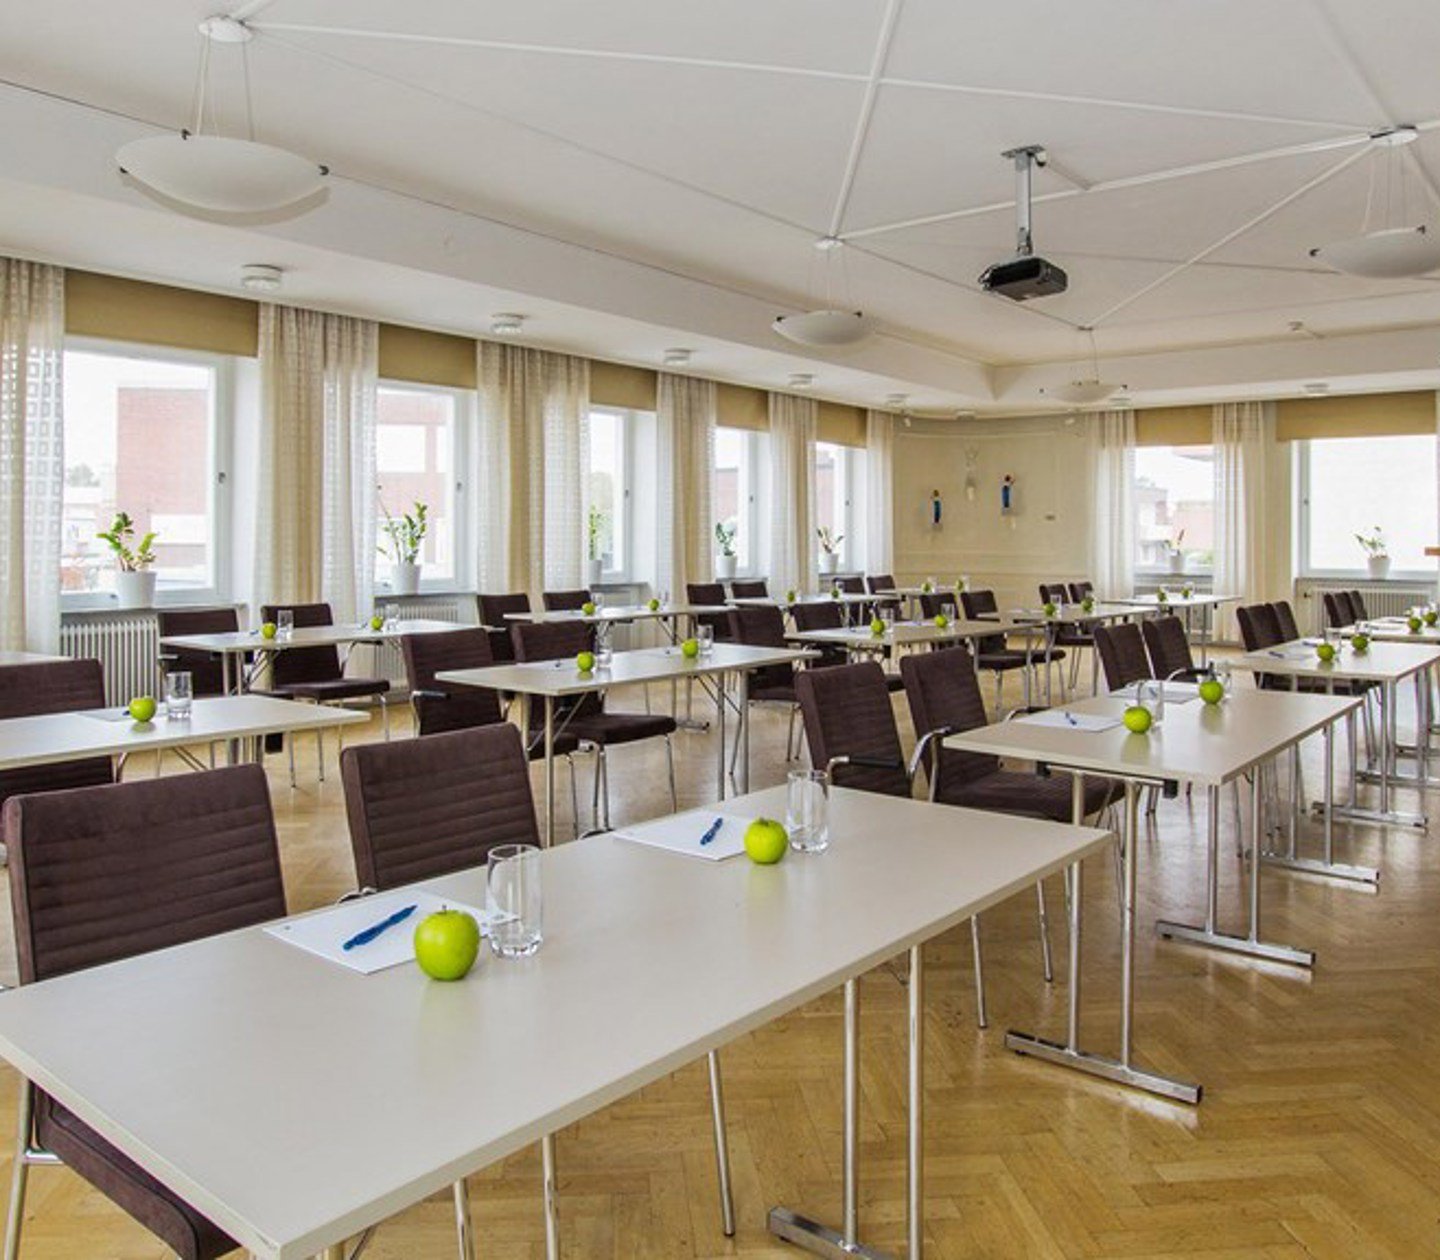 Conference room with school seating and many windows